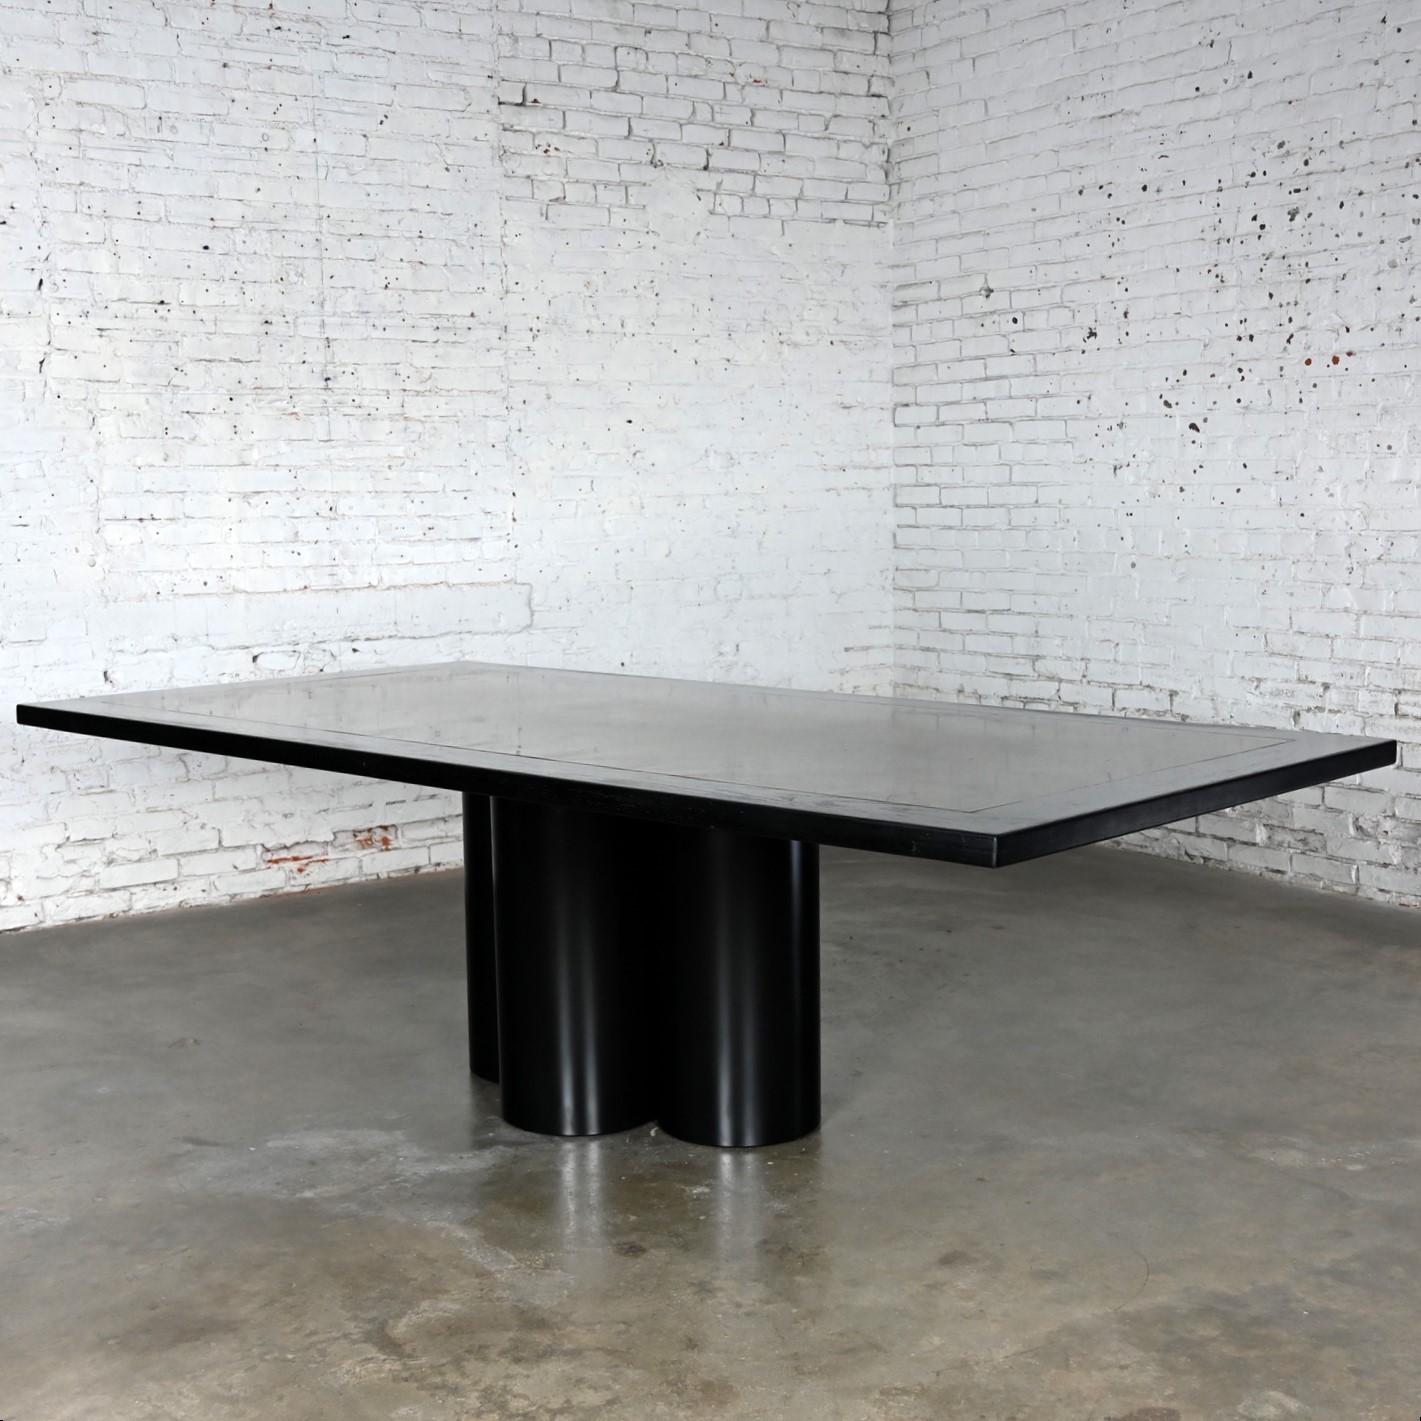 20th Century Modern Dining Table Black Painted Metal Cylinder Pedestal Base & Brass Top Inset For Sale